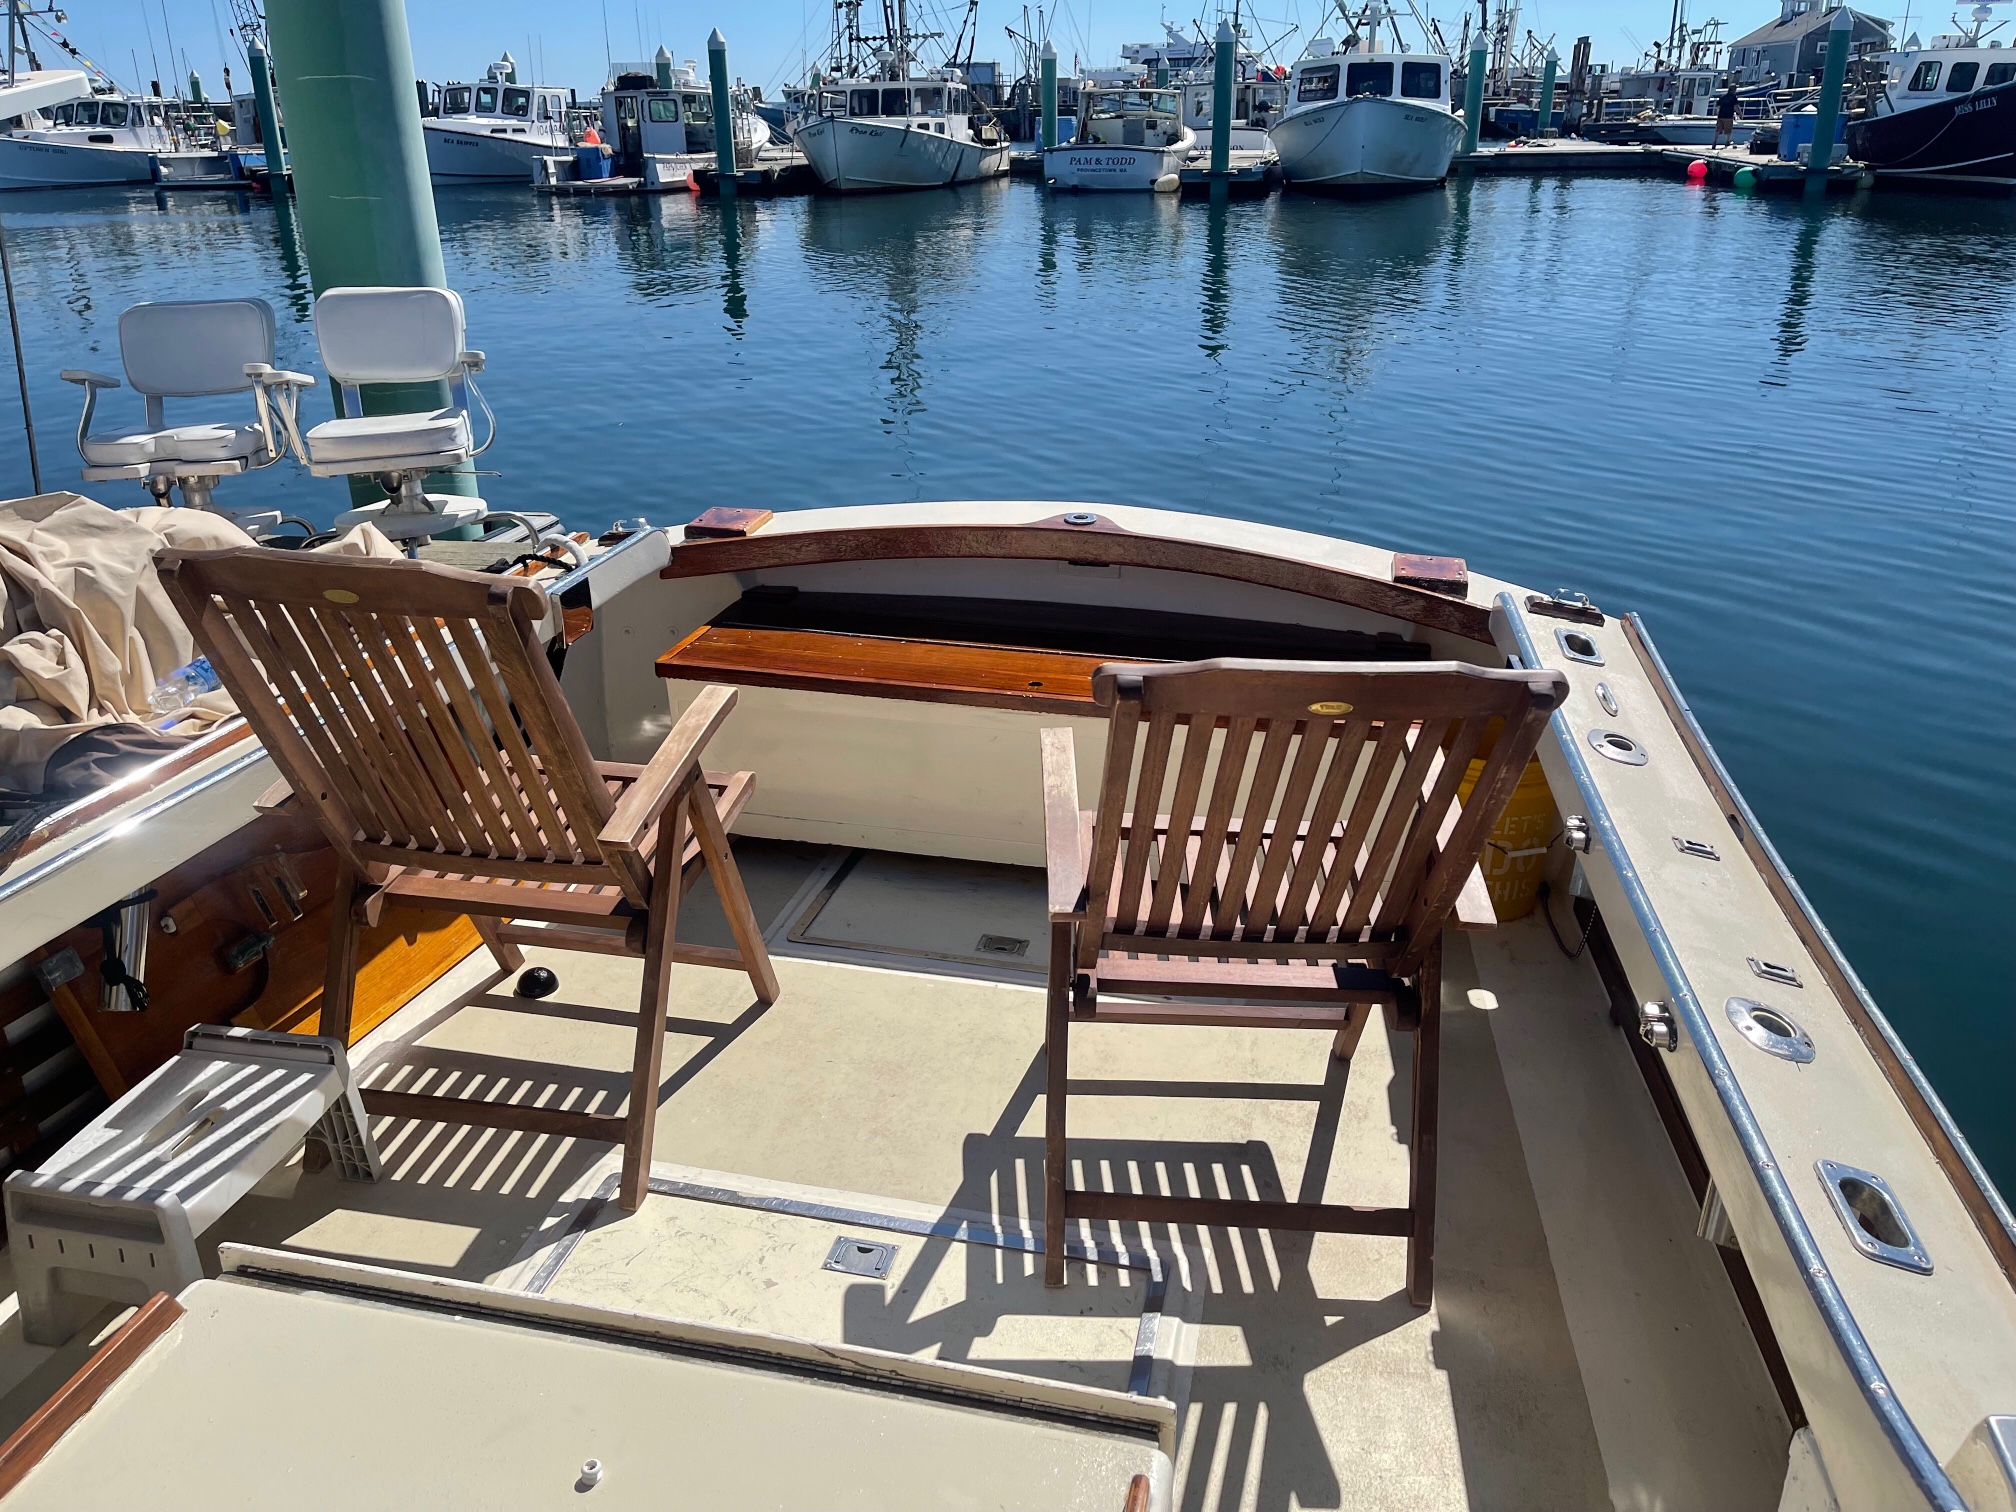 Chair on the deck of Bethie while docked in Provincetown Harbor